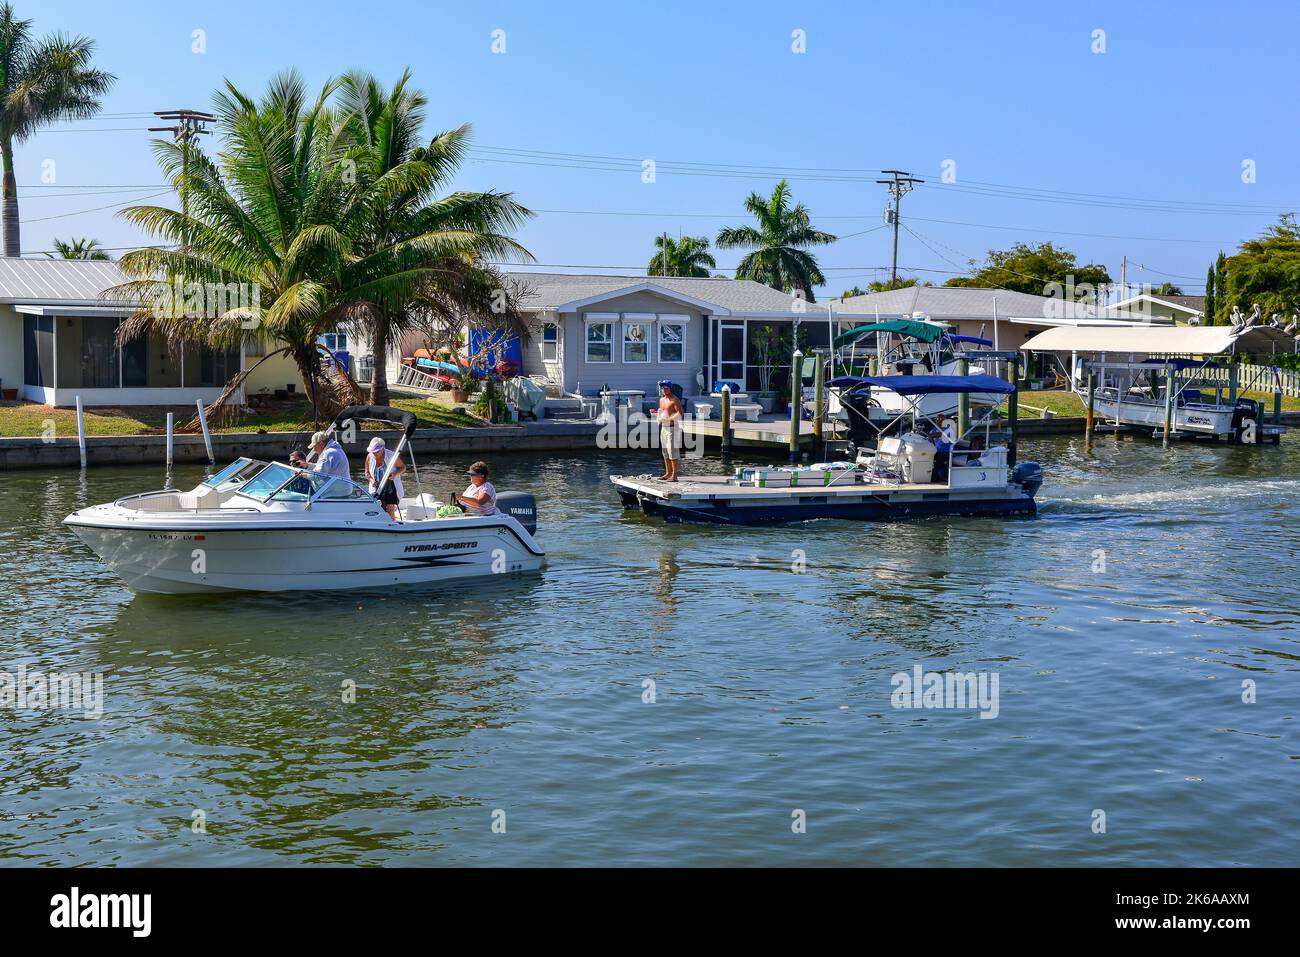 People on boats in boating community, on the canal near the marina and Phuzzy's boat shack restaurant and bar in Saint James City, Pine Island, FL Stock Photo